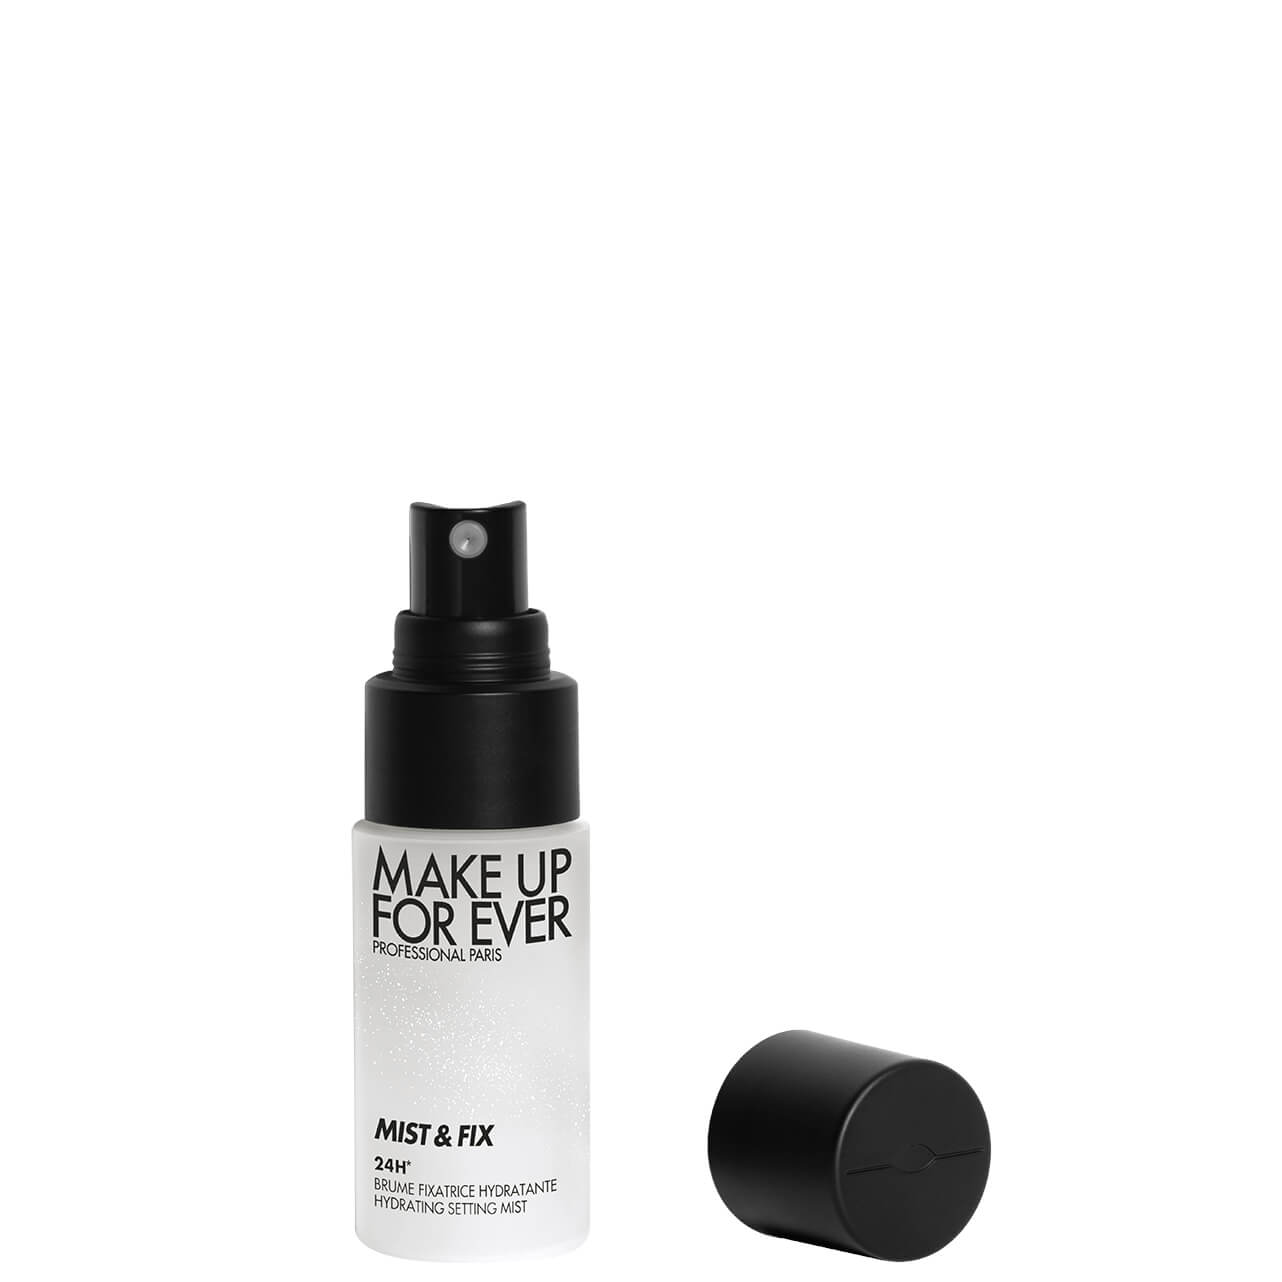 MAKE UP FOR EVER Mist and Fix-23 BTG Spray 30ml